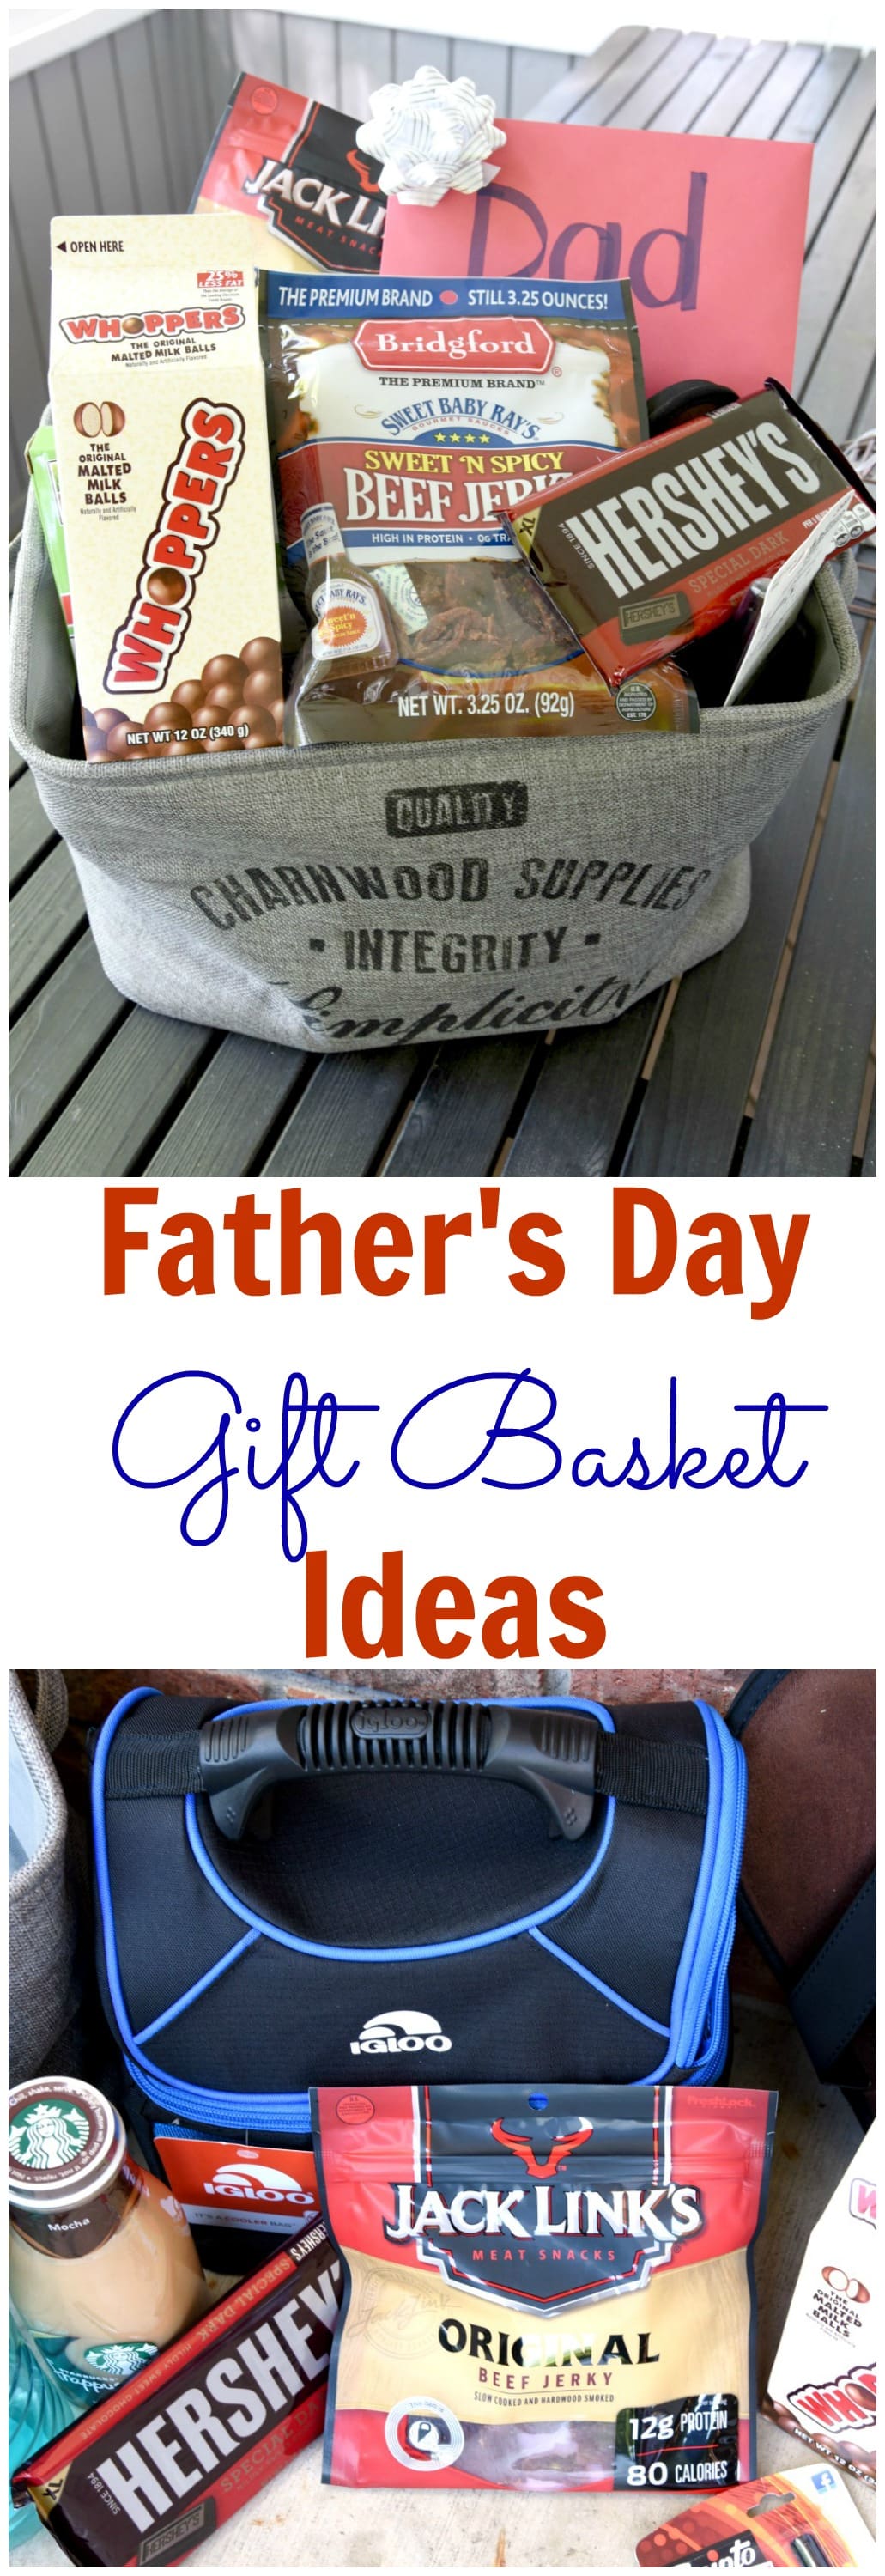 Fathers day gift basket ideas